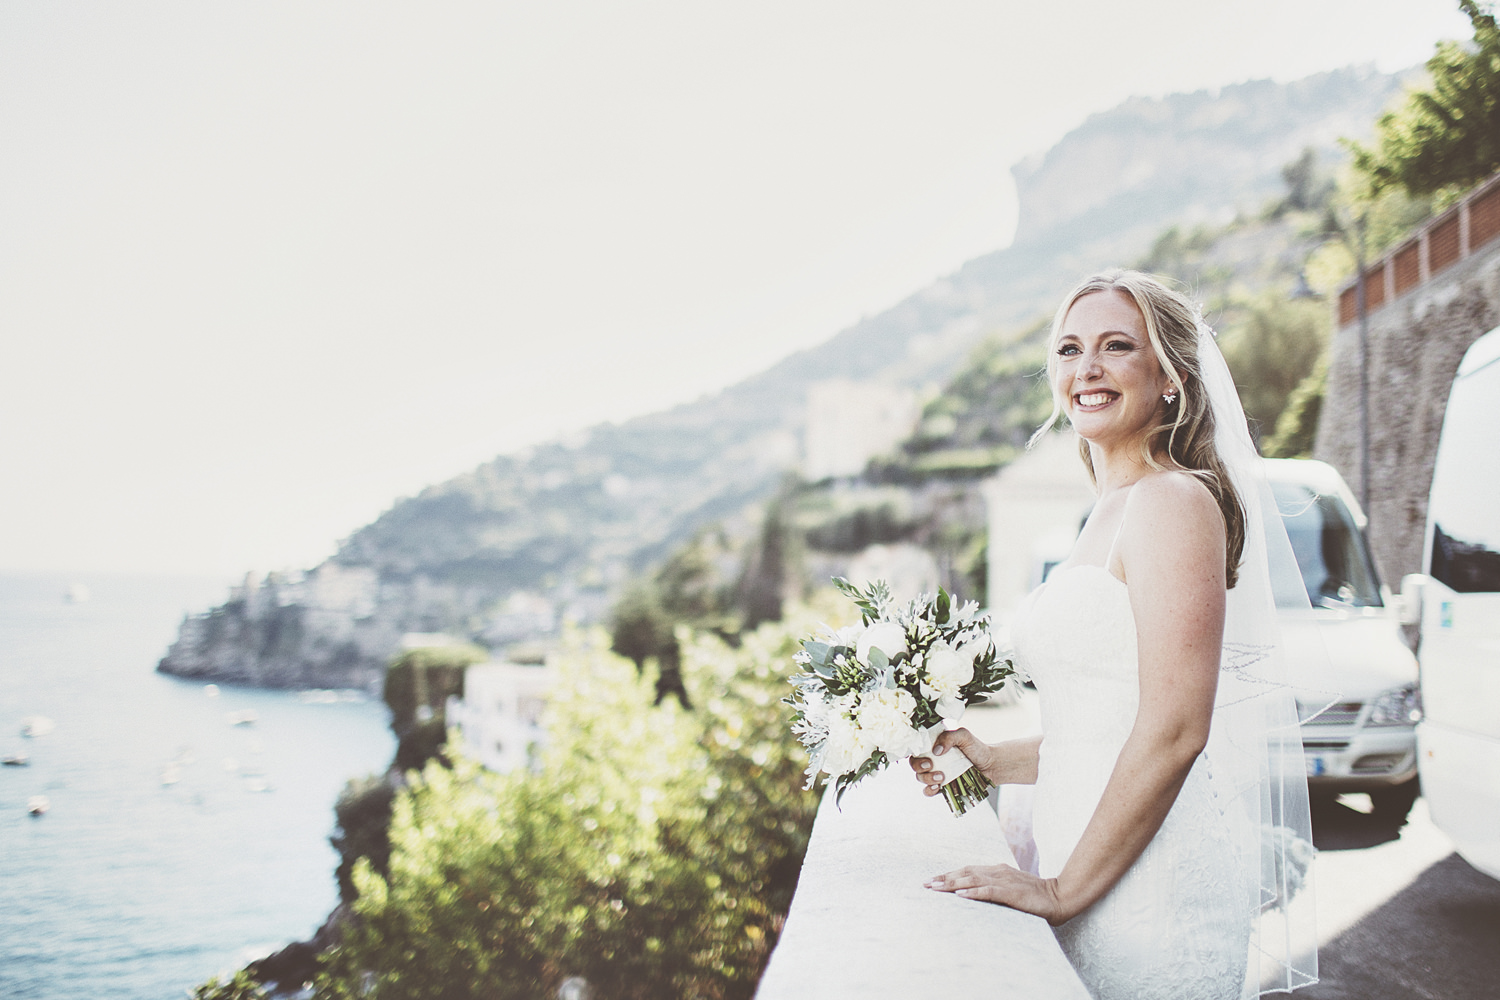 Her bouquet was of greenery and white blooms for an elegant and timeless feel